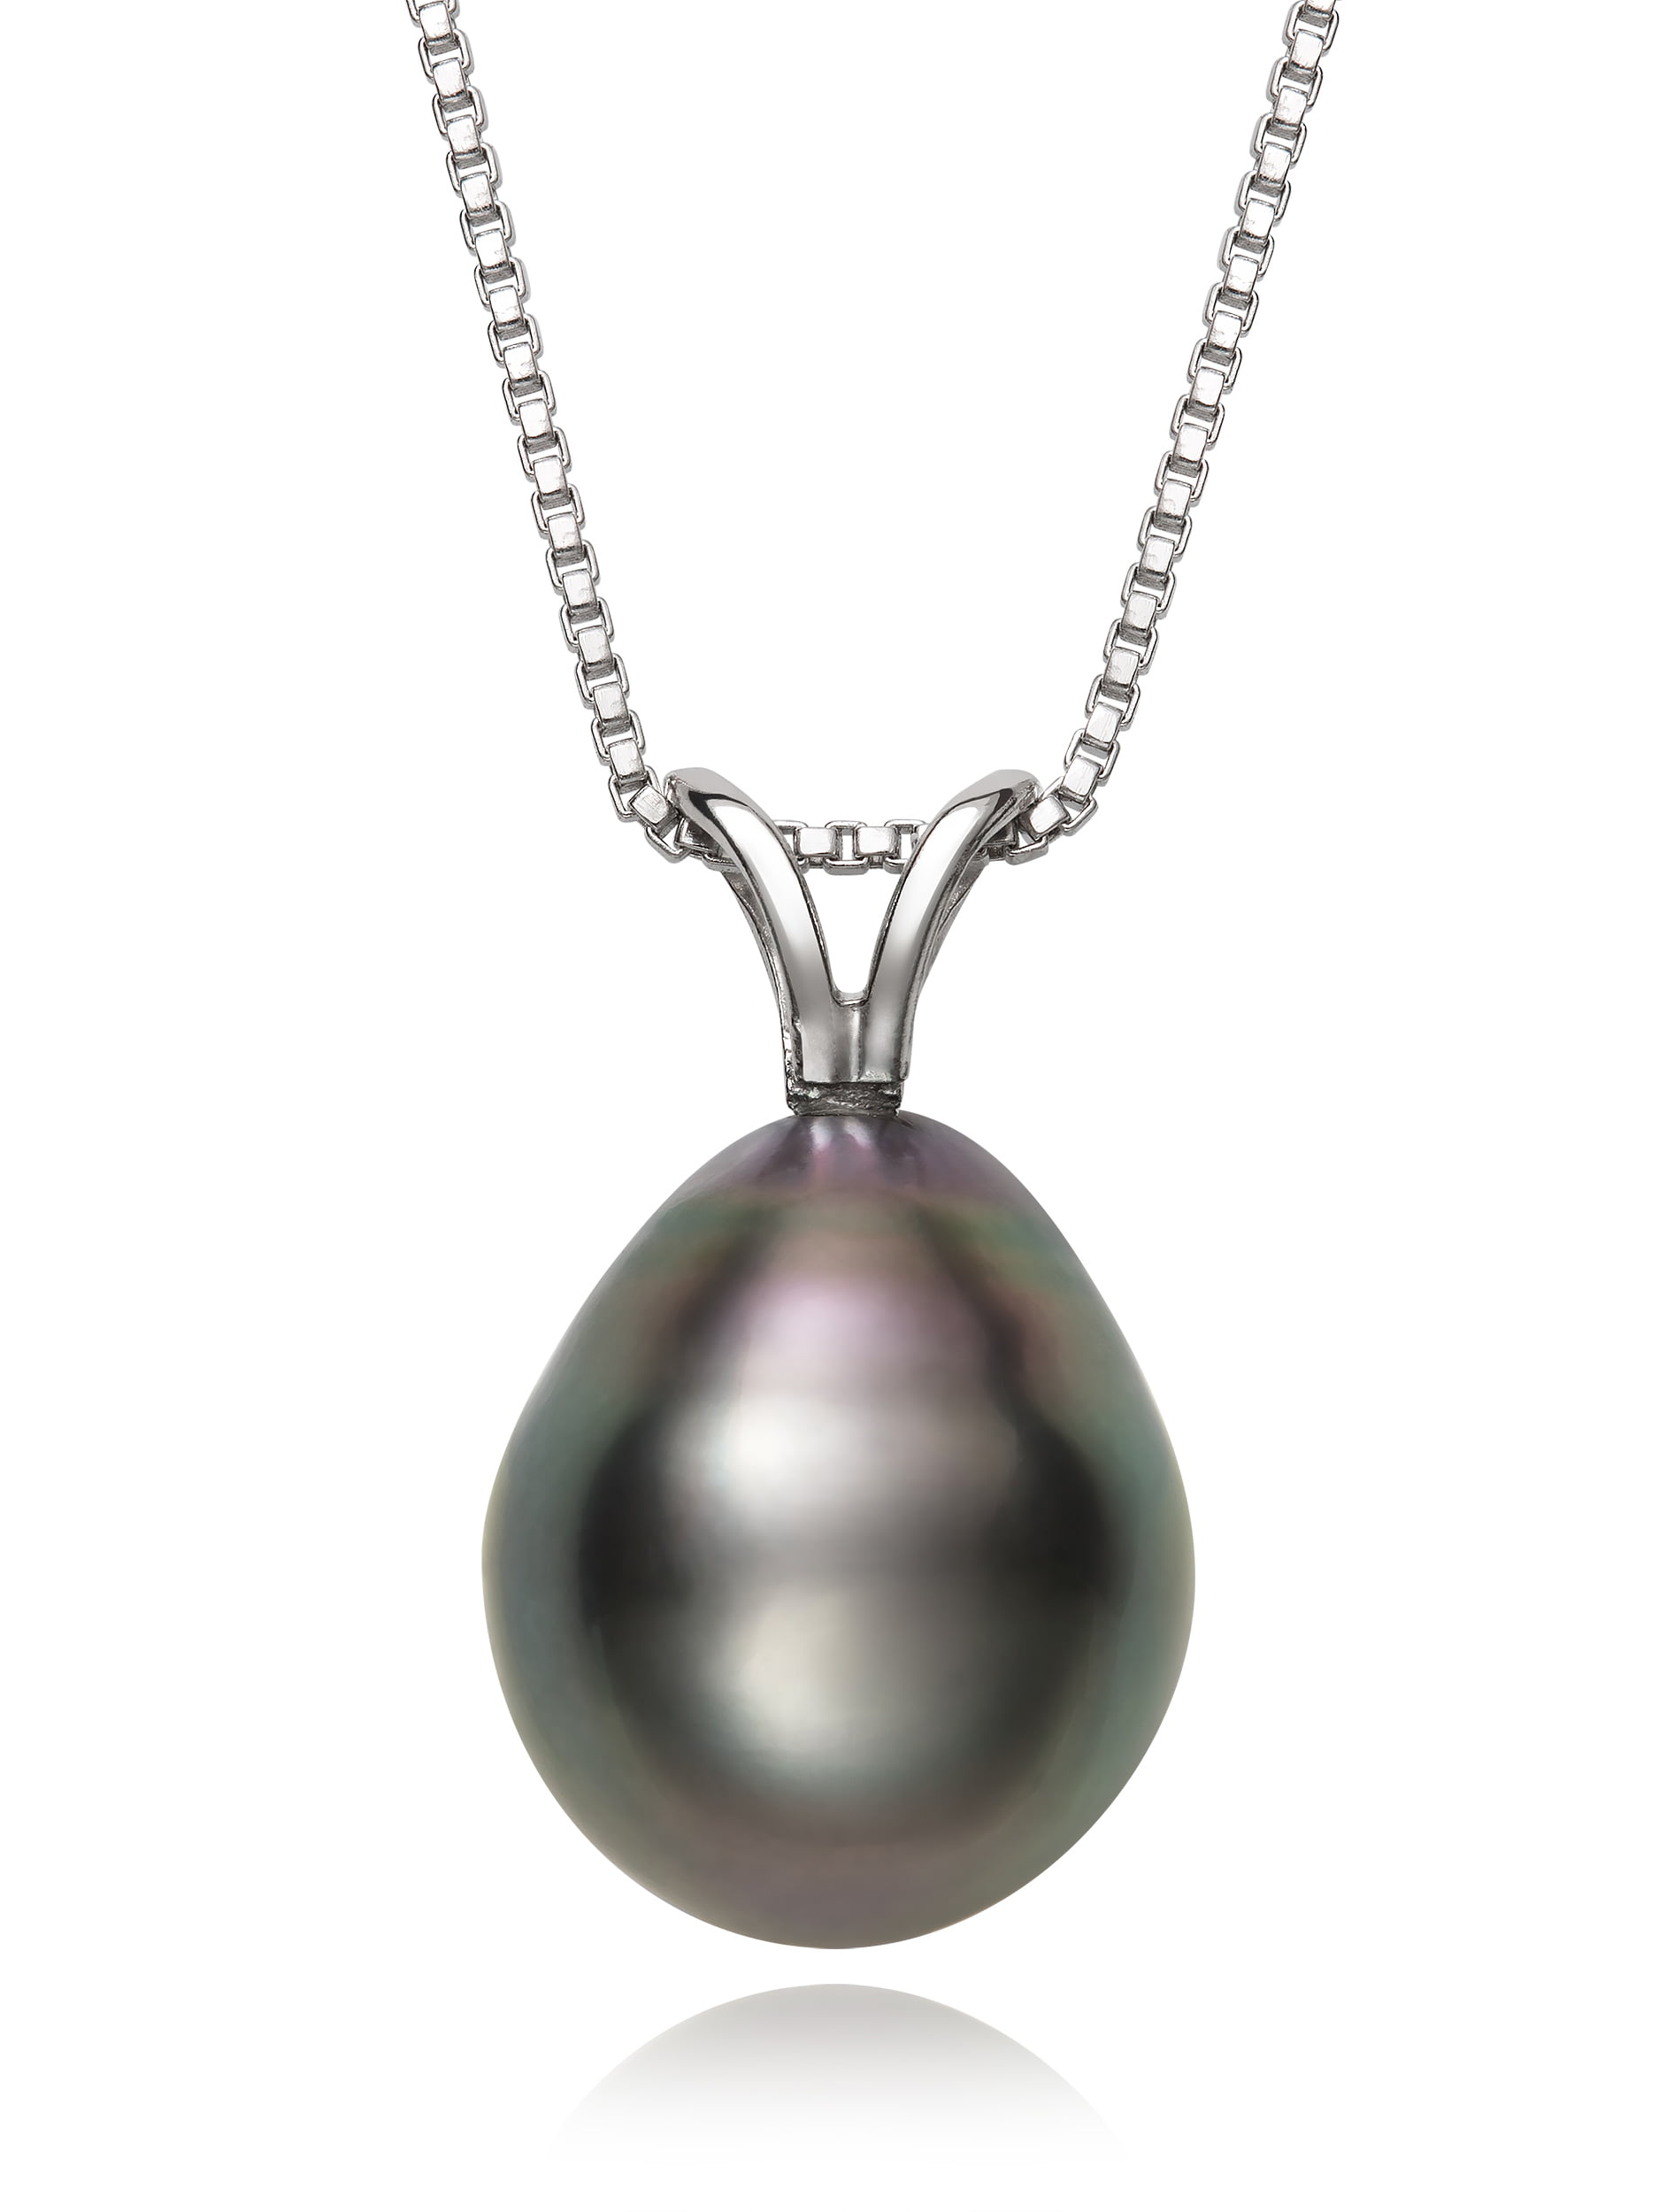 11 Items to Wear With A Tahitian Black Pearl Necklace - PearlsOnly